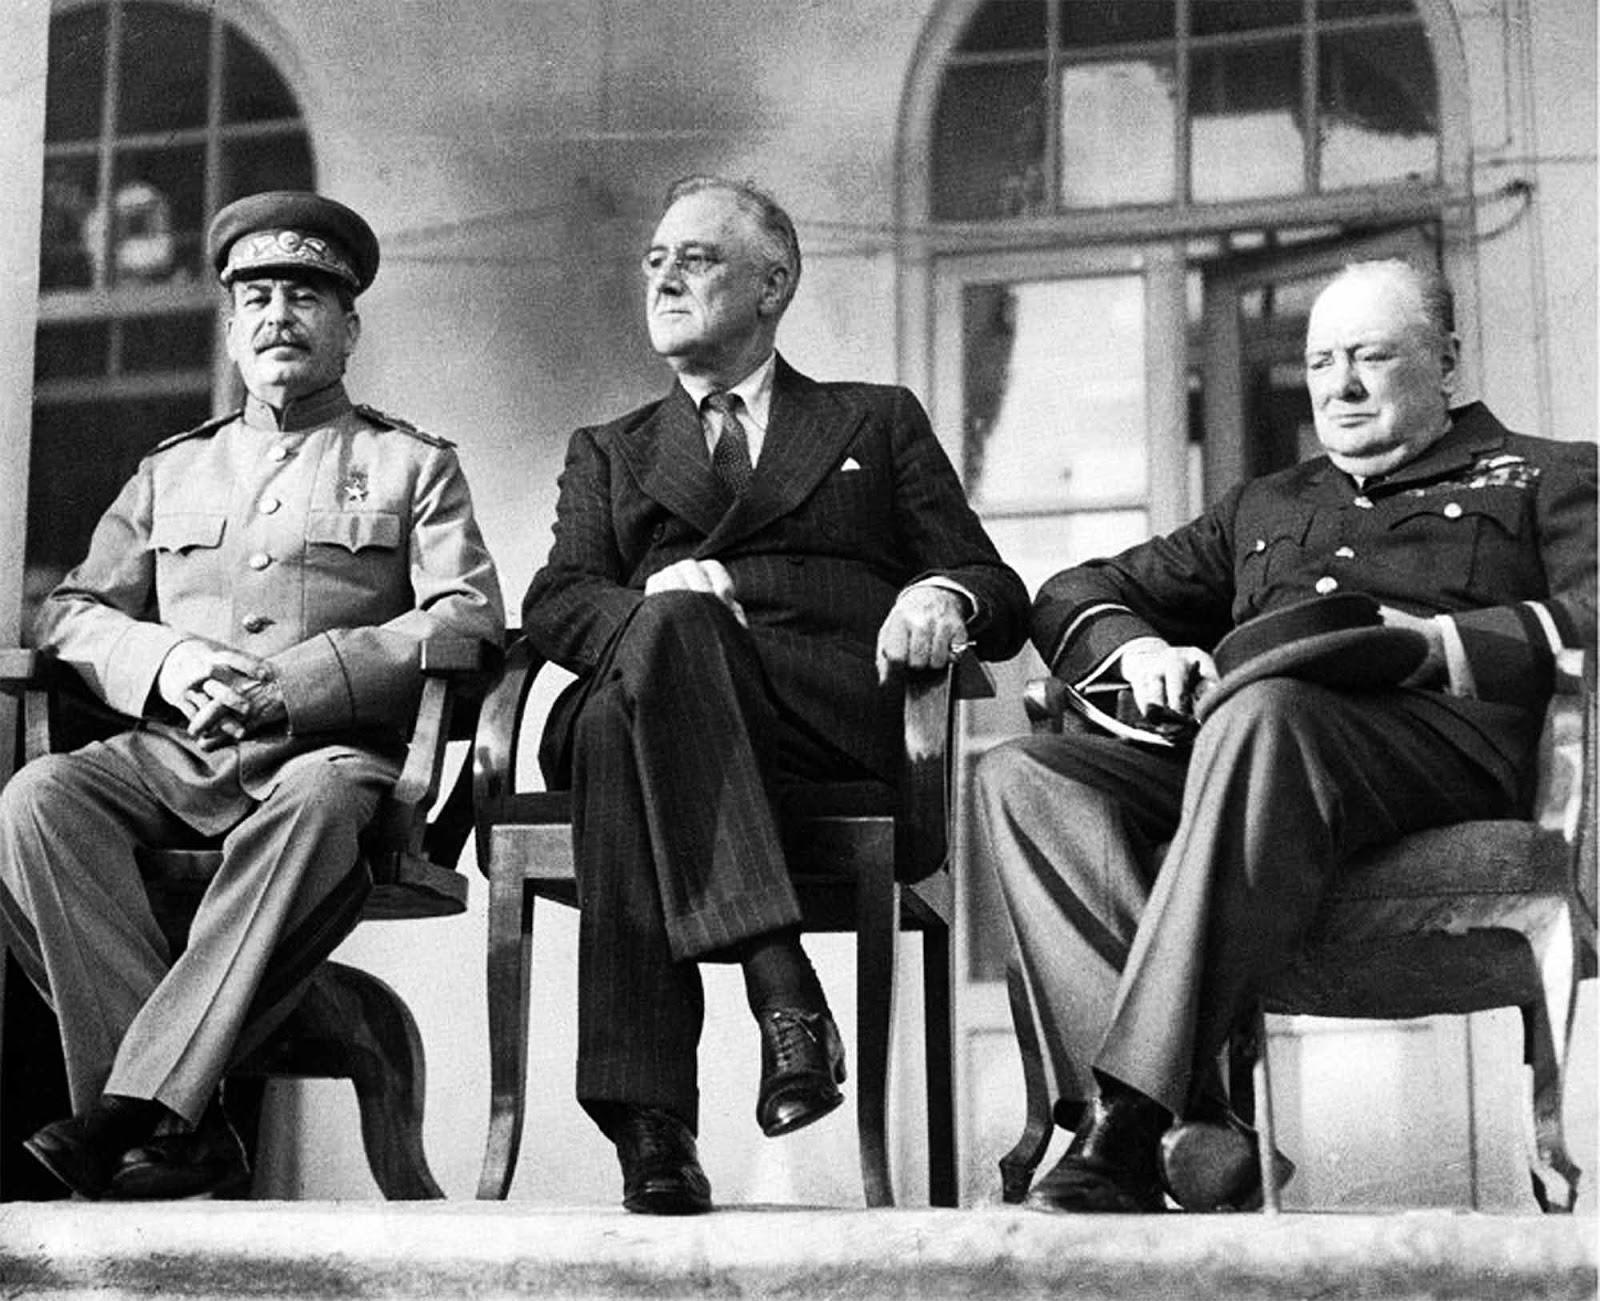 The “Big Three” - Stalin, Roosevelt and Churchill - meet at the Tehran Conference, 1943.